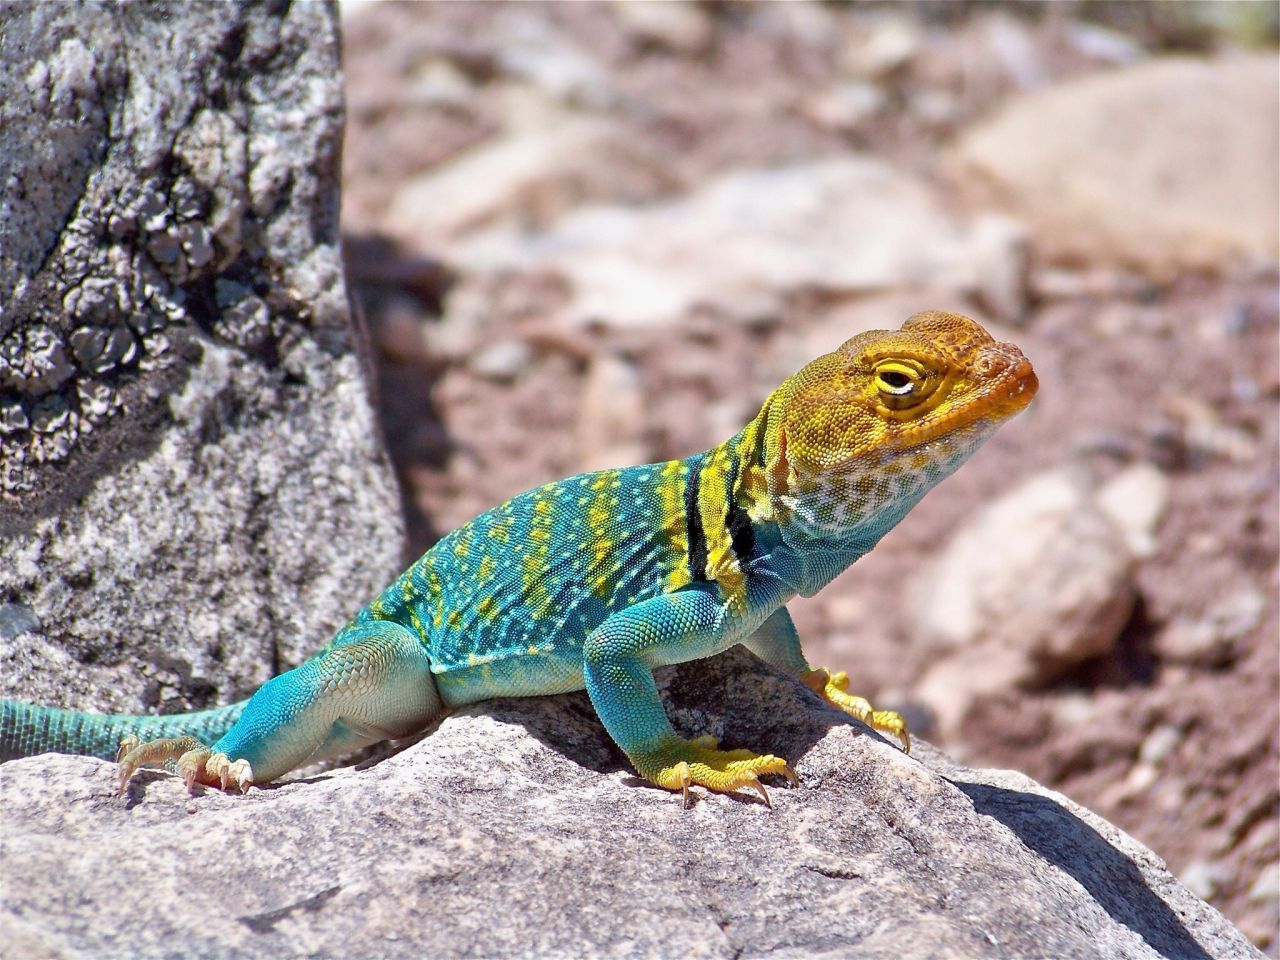 This eye-catching lizard "patiently posed" for dozens of photos taken by Dana Barbato during a desert hike near Page, Arizona. <br /> 